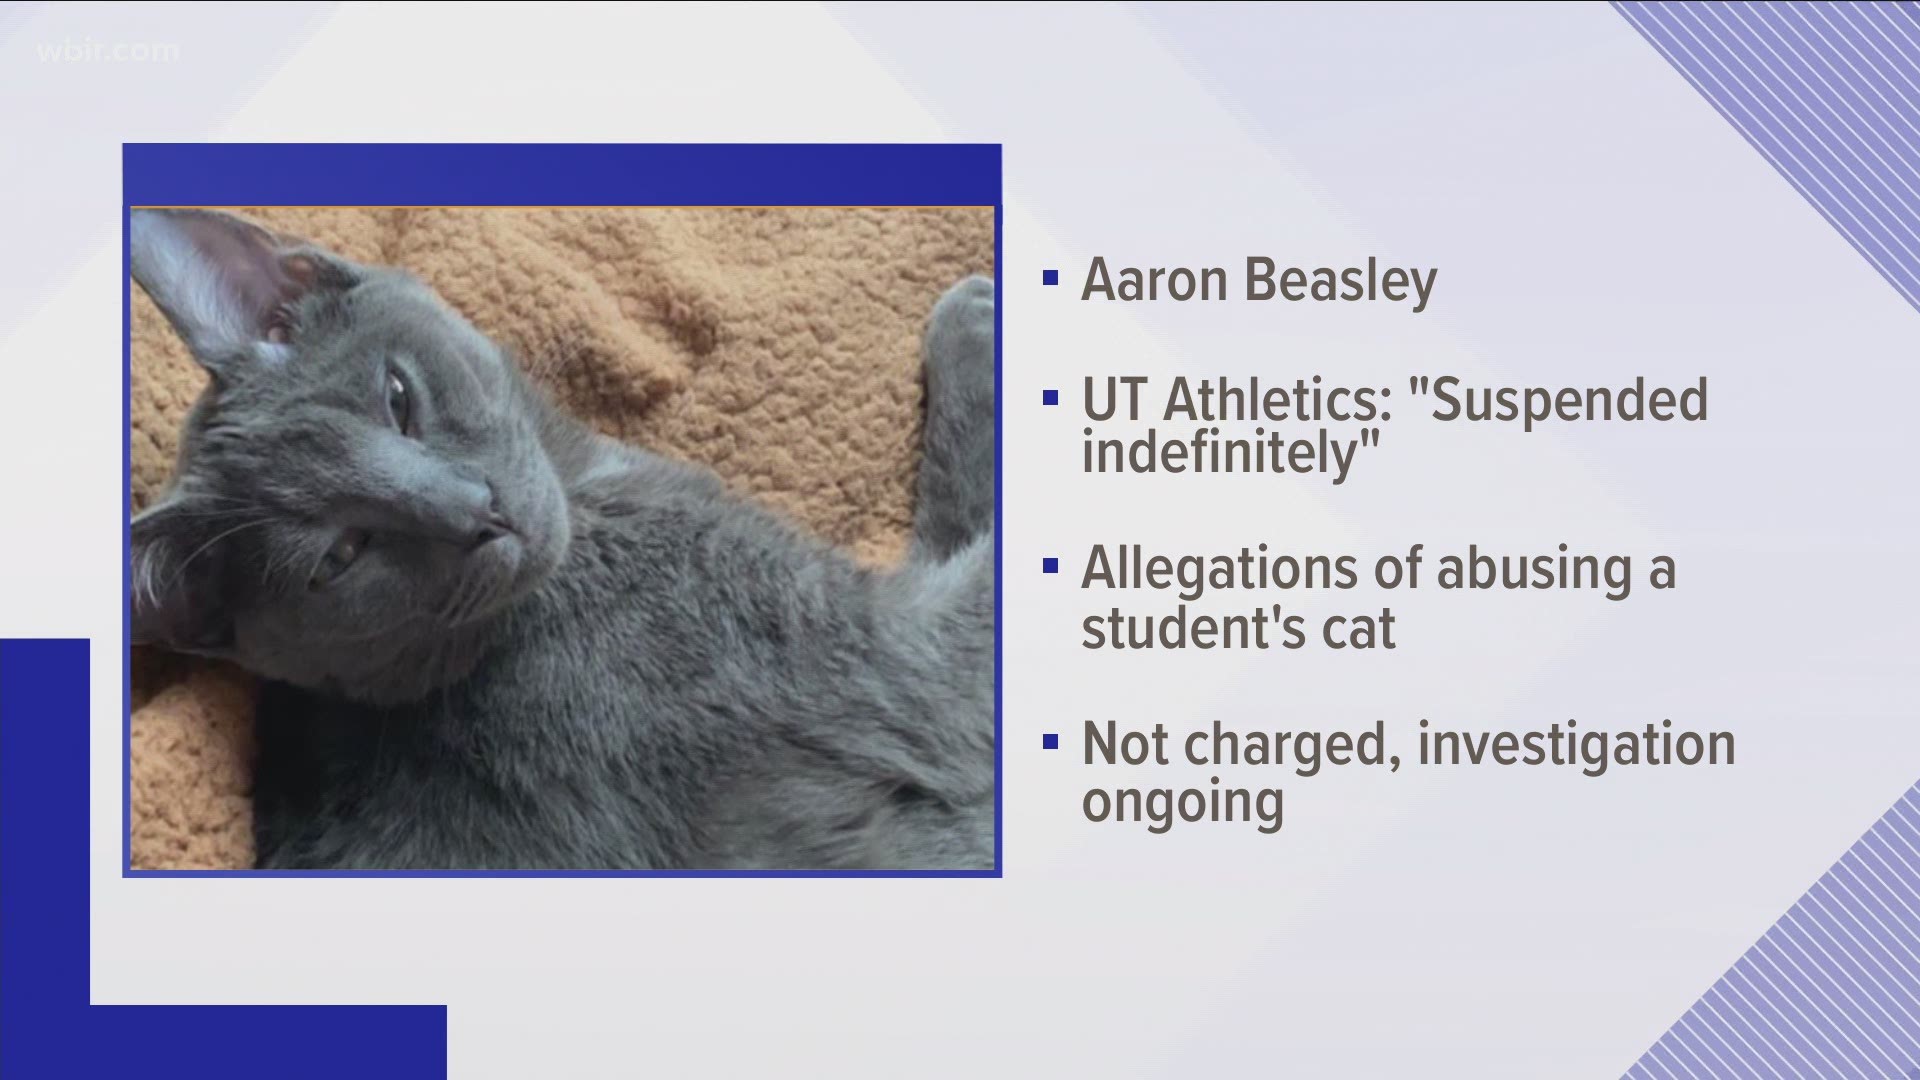 On Friday, Knoxville police confirmed they received a report that Vols linebacker Aaron Beasley abused a cat belonging to another student.